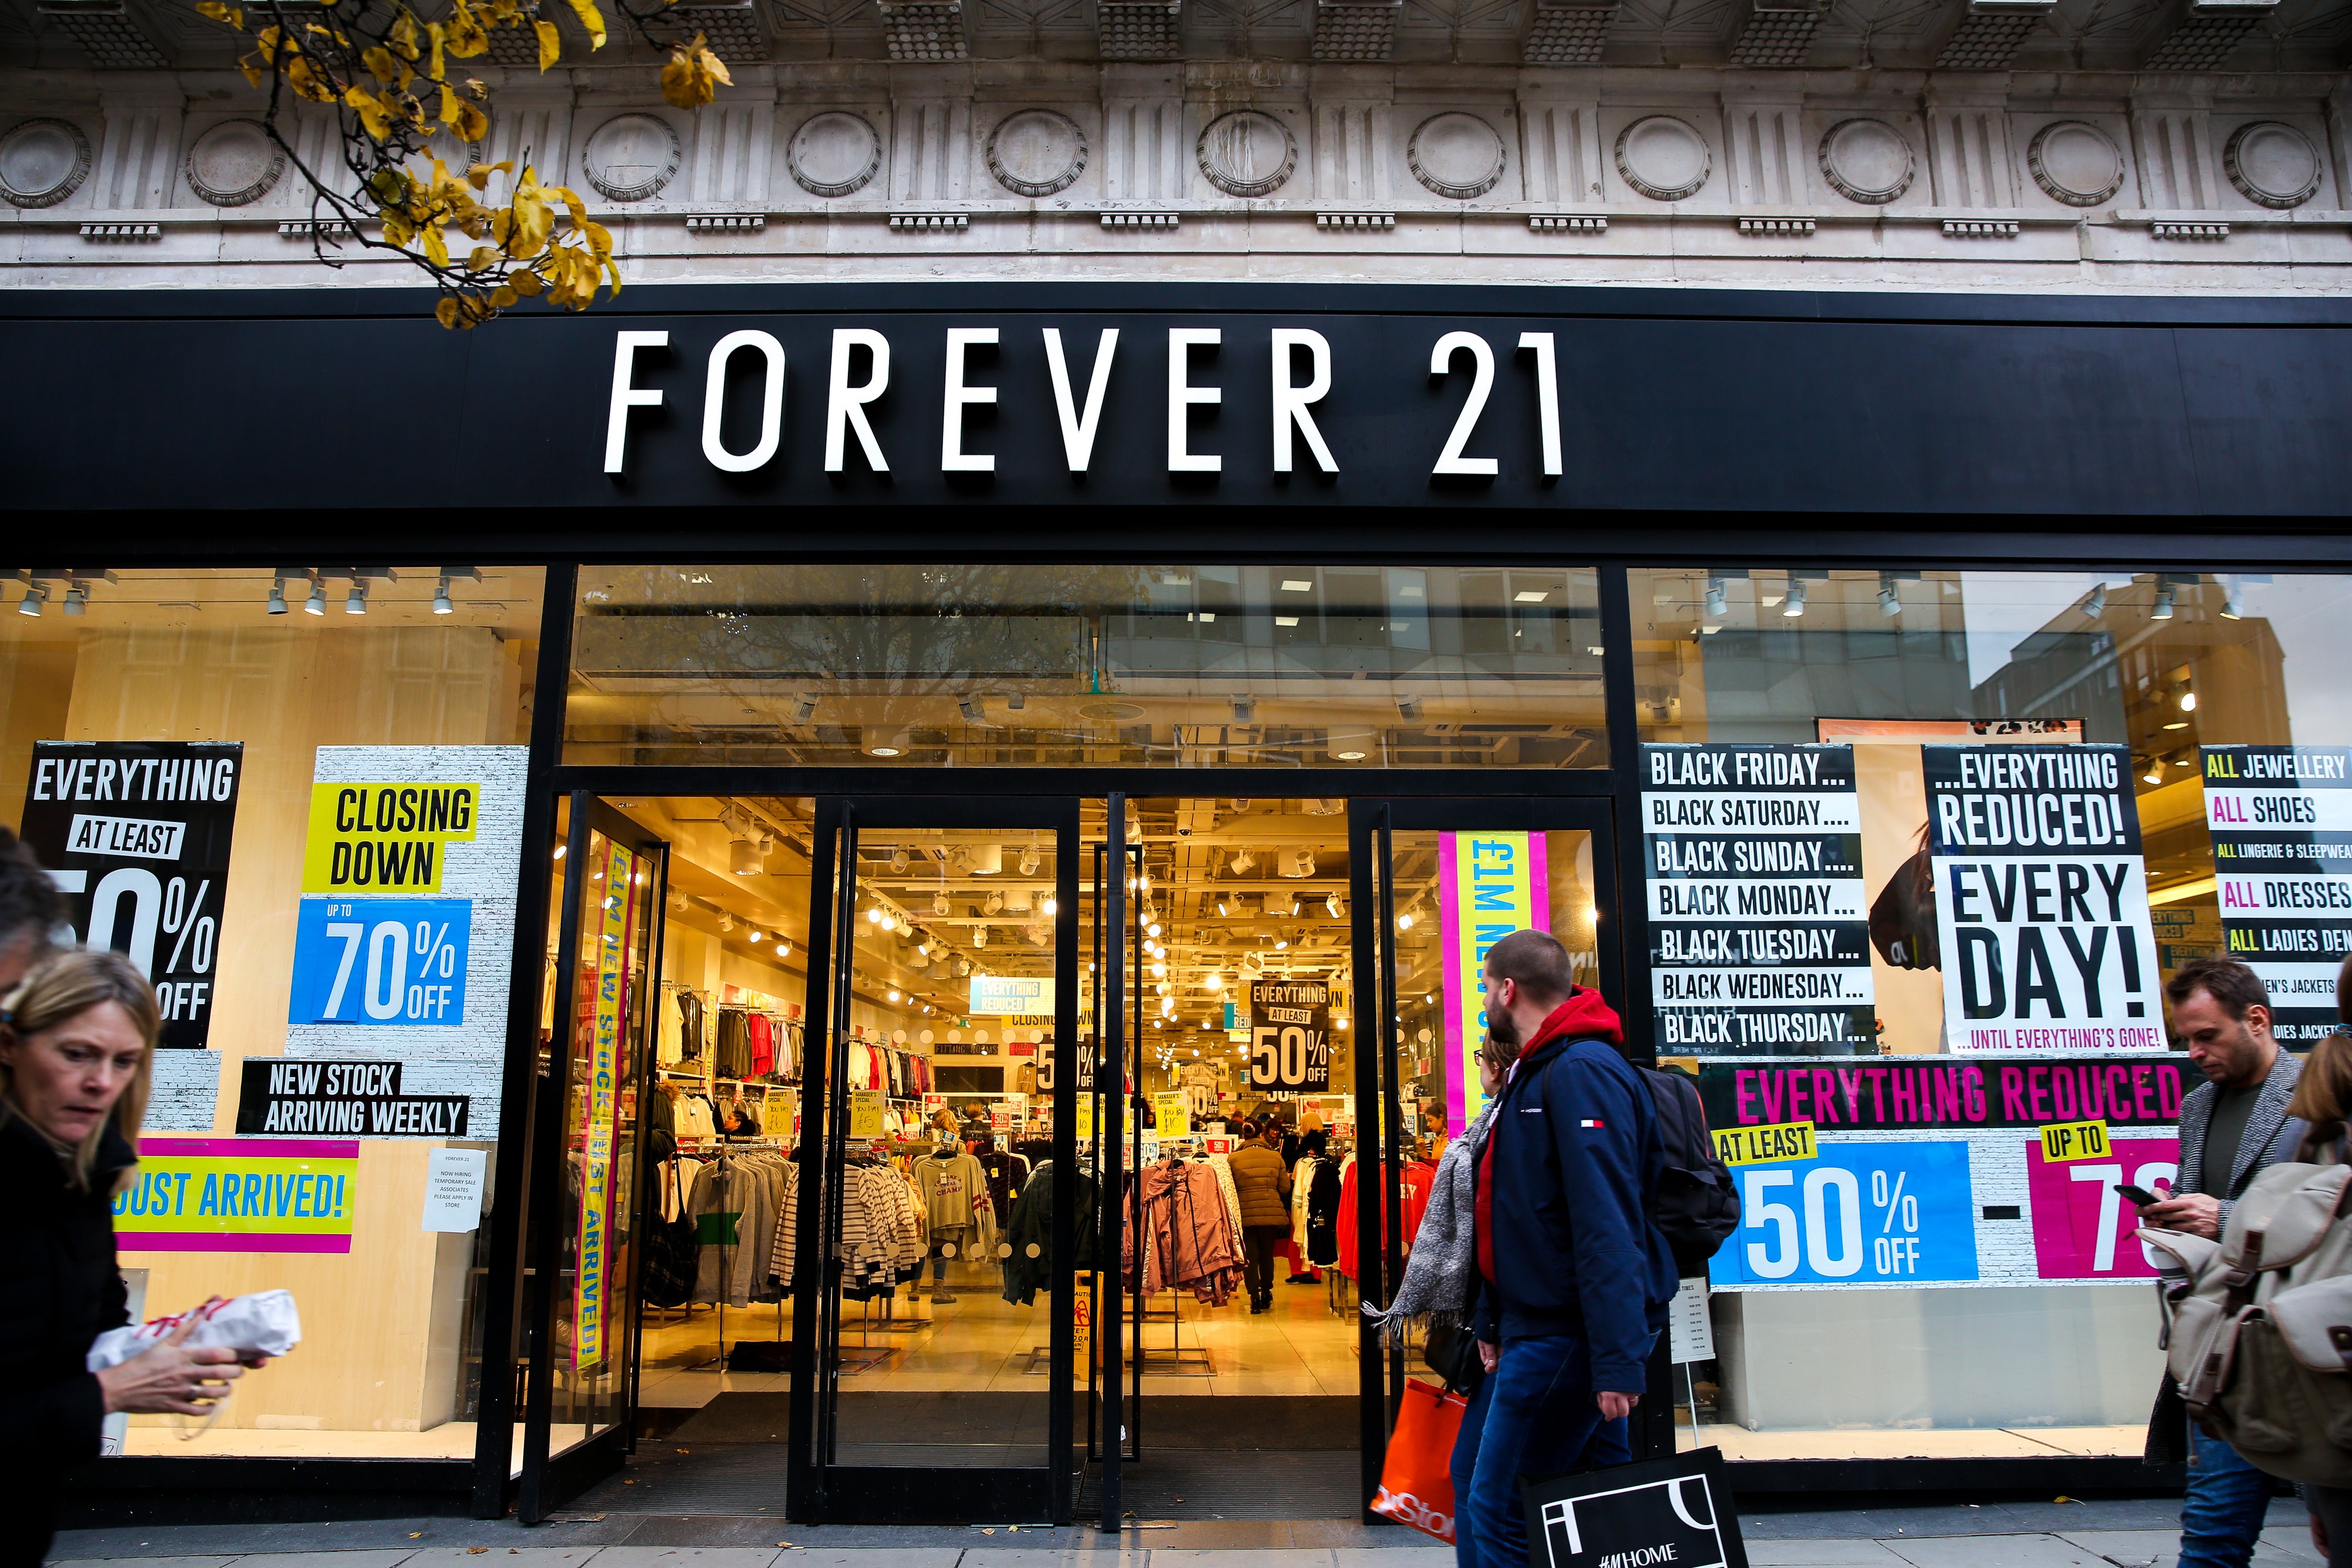 LONDON, UNITED KINGDOM - 2019/11/28: Shoppers walk past the Closing Down signs in the window of Forever 21 store on Oxford Street in London. (Photo by Steve Taylor/SOPA Images/LightRocket via Getty Images) (Foto: SOPA Images/LightRocket via Gett)